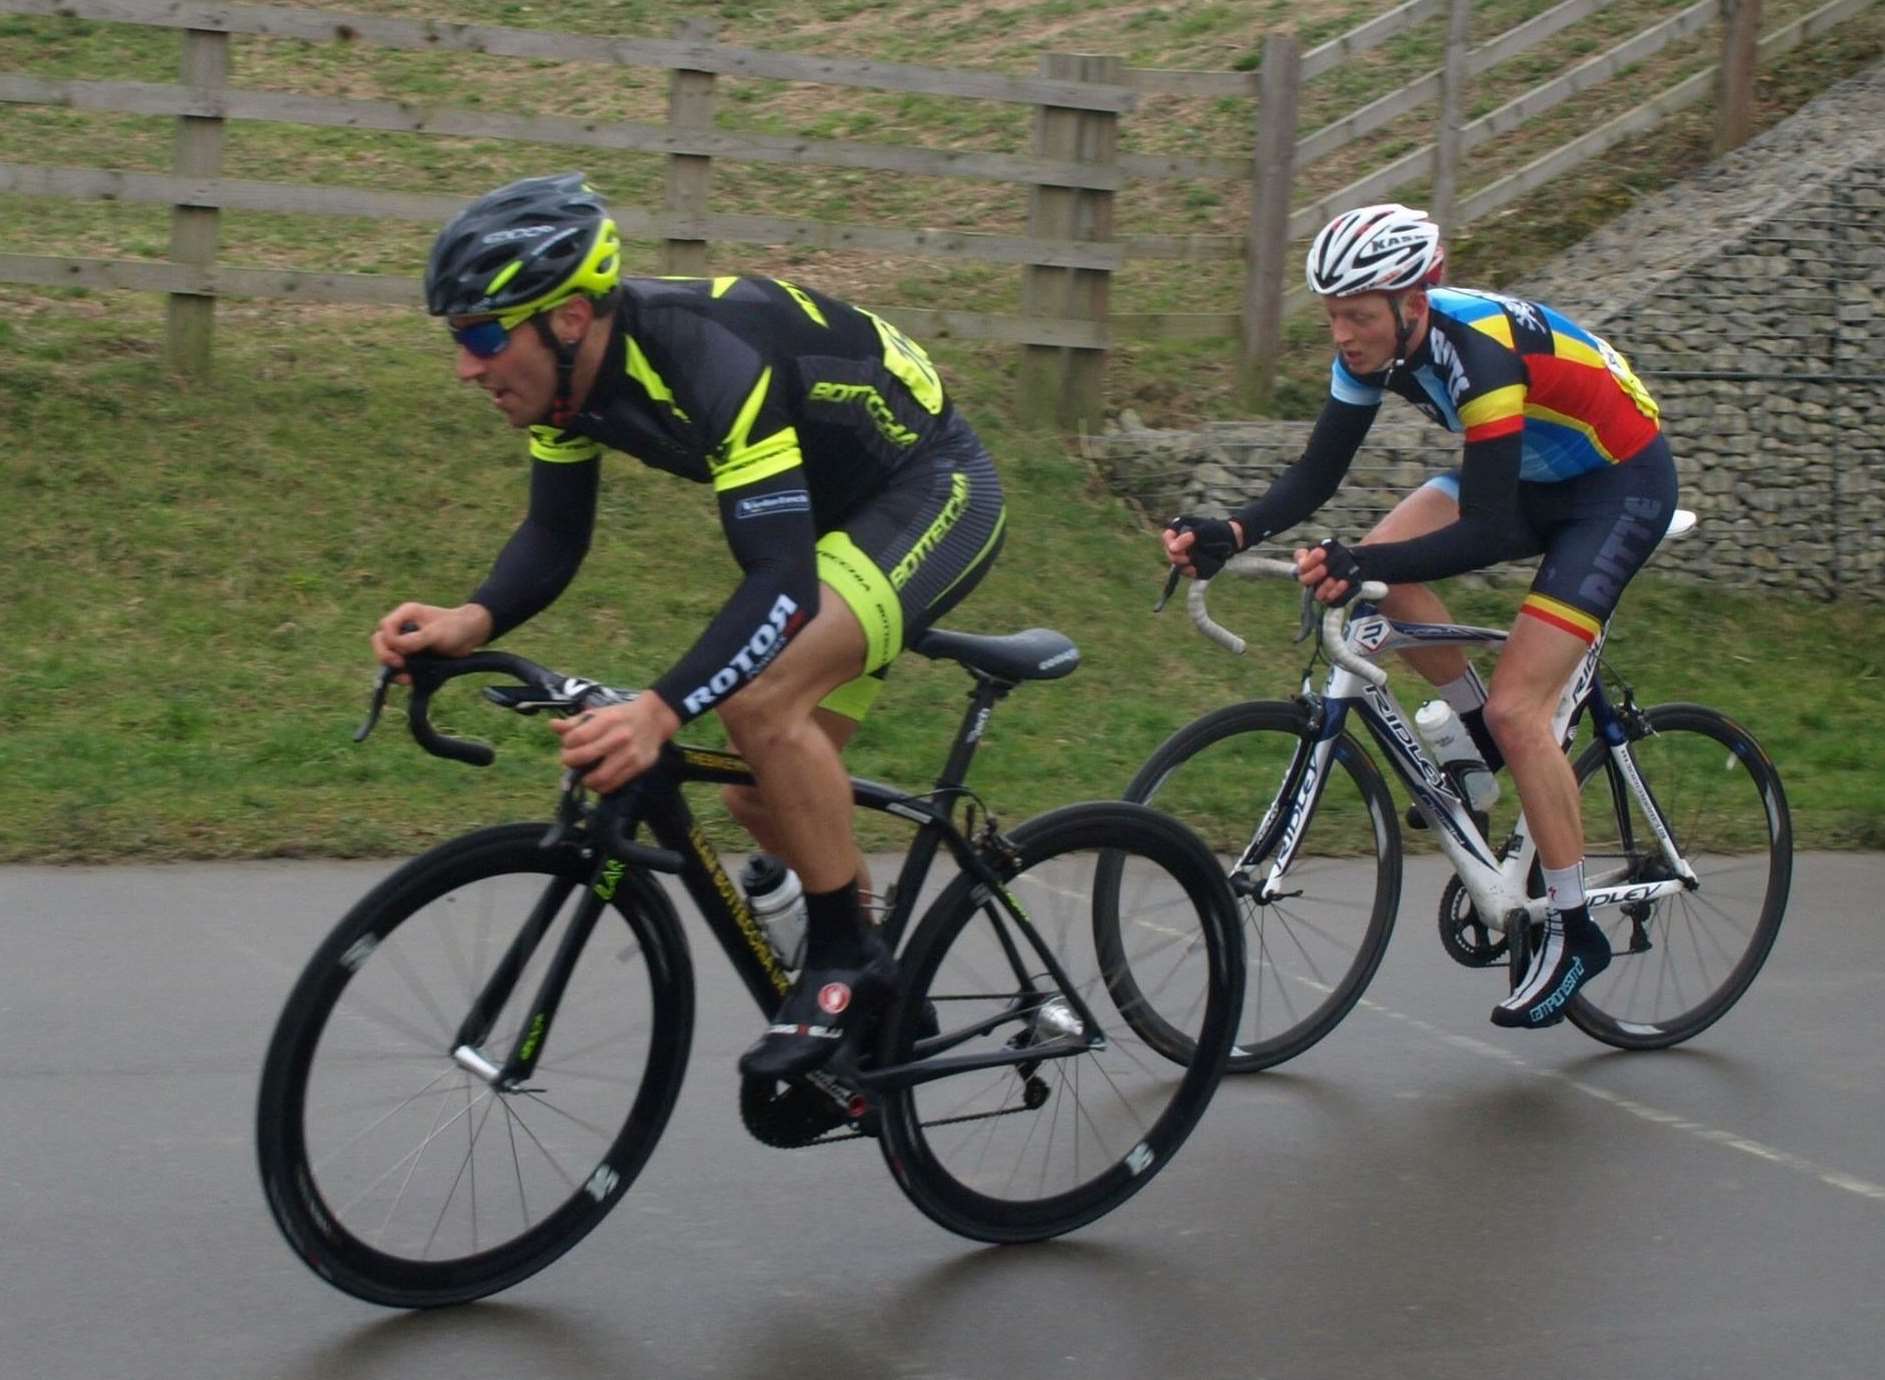 Billy Whenman (left) in his Bottecchia colours